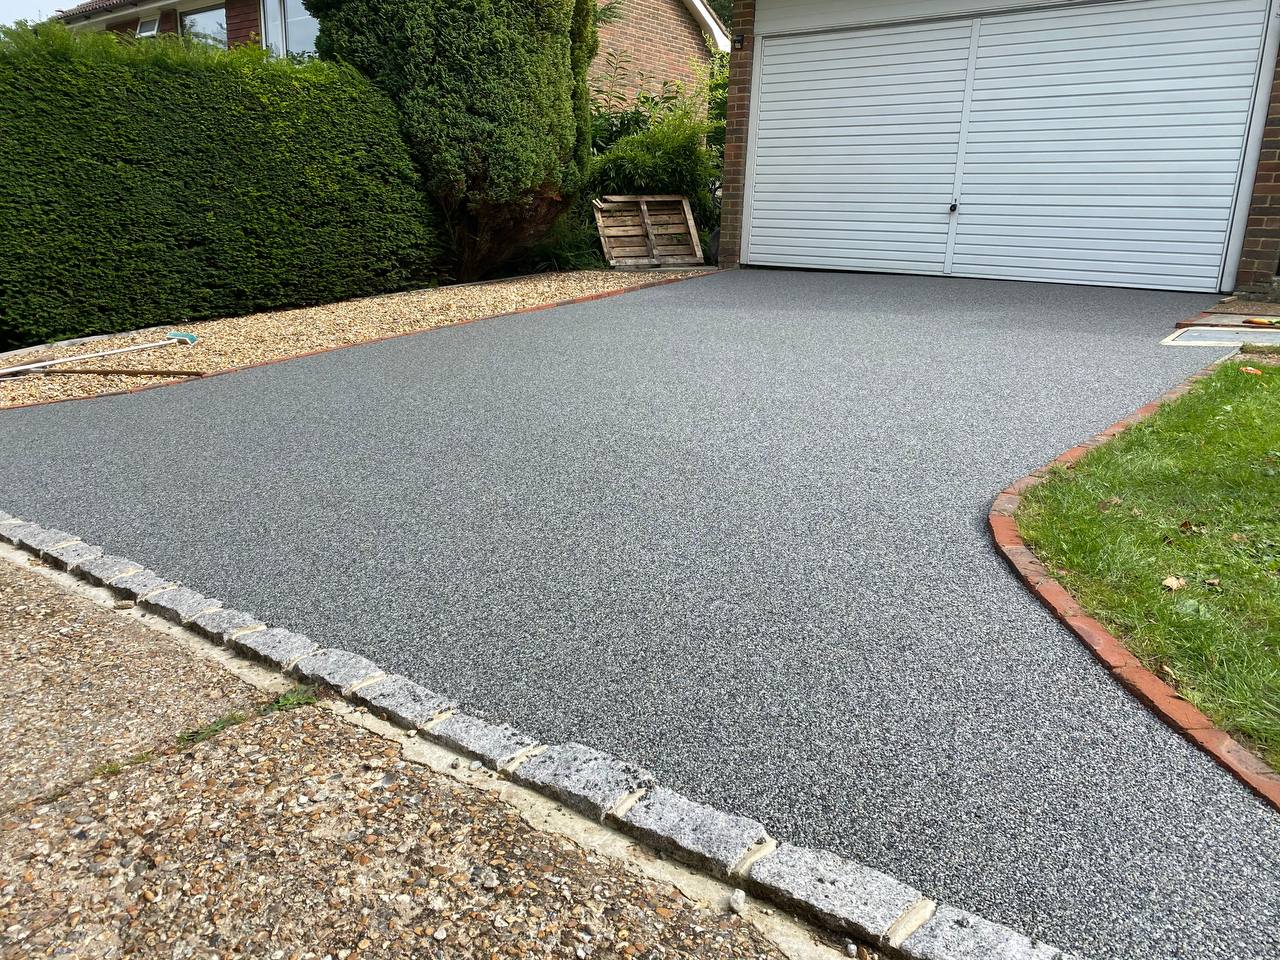 This is a photo of a new resin bound driveway carried out in Wigan. All works done by Resin Driveways Wigan